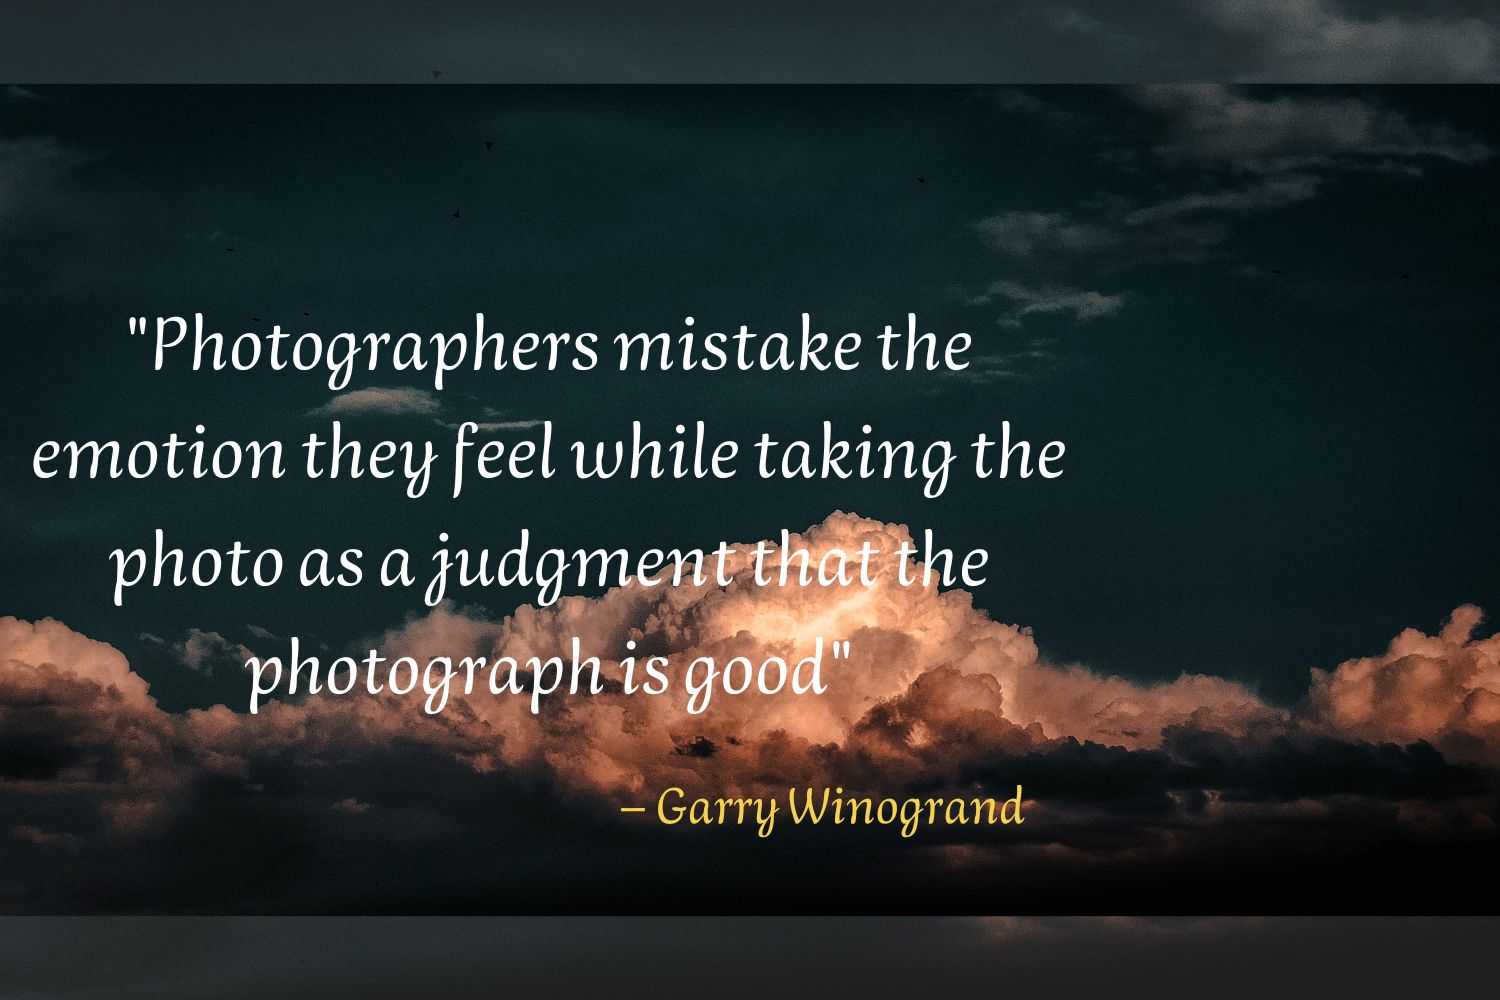 35 Famous Quotes on Photography Always Inspire You